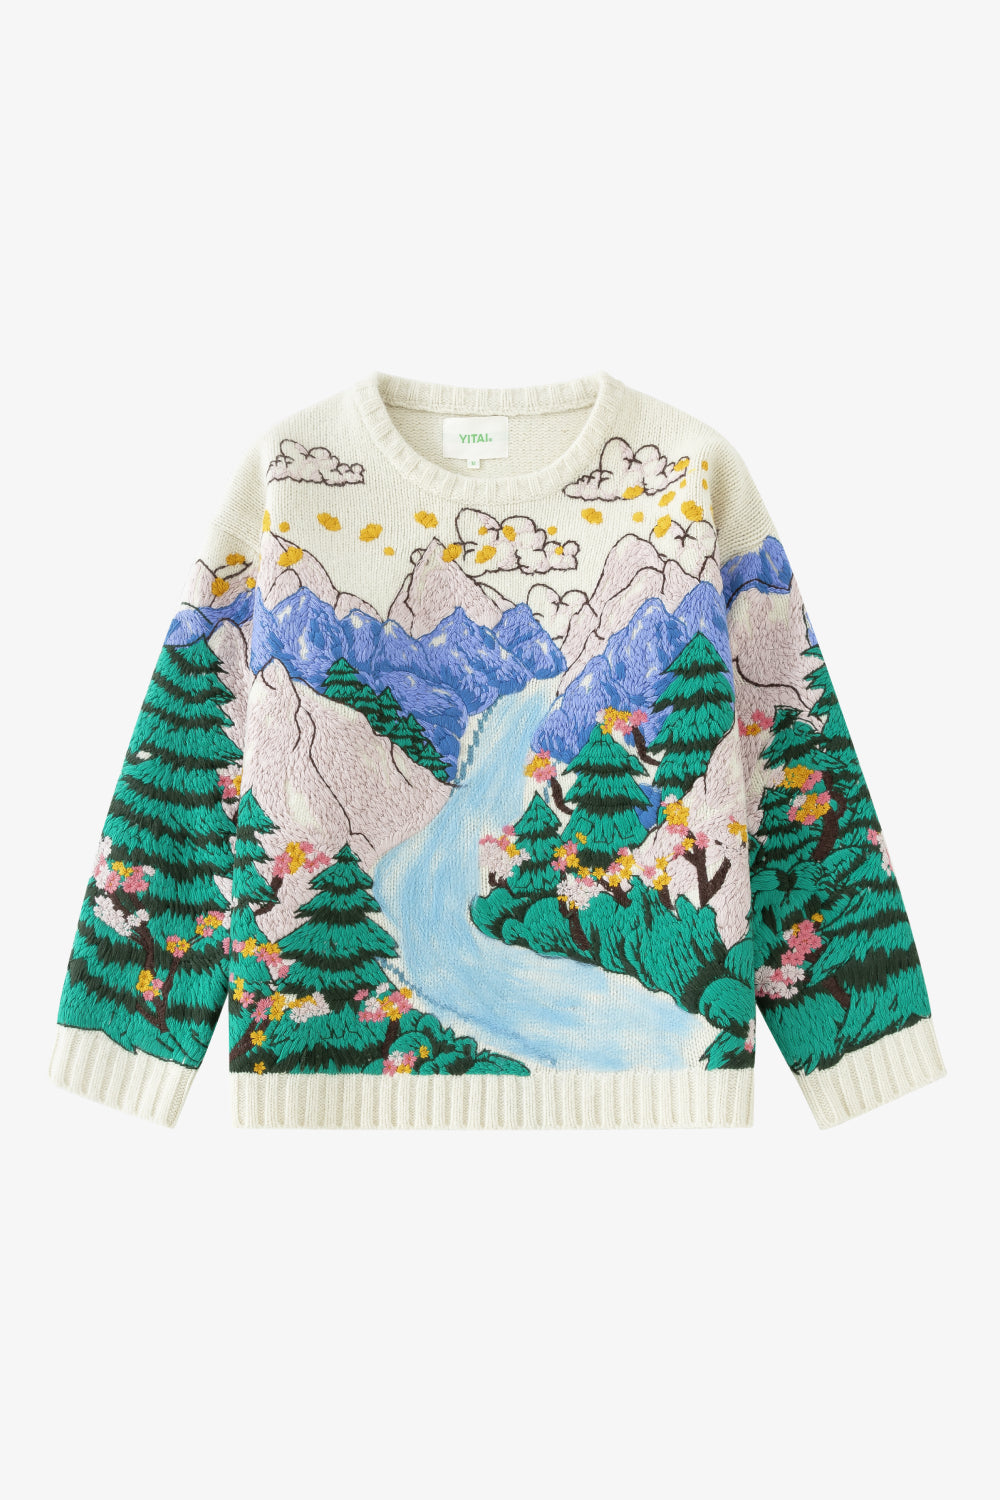 Inyo Embroidery Sweater